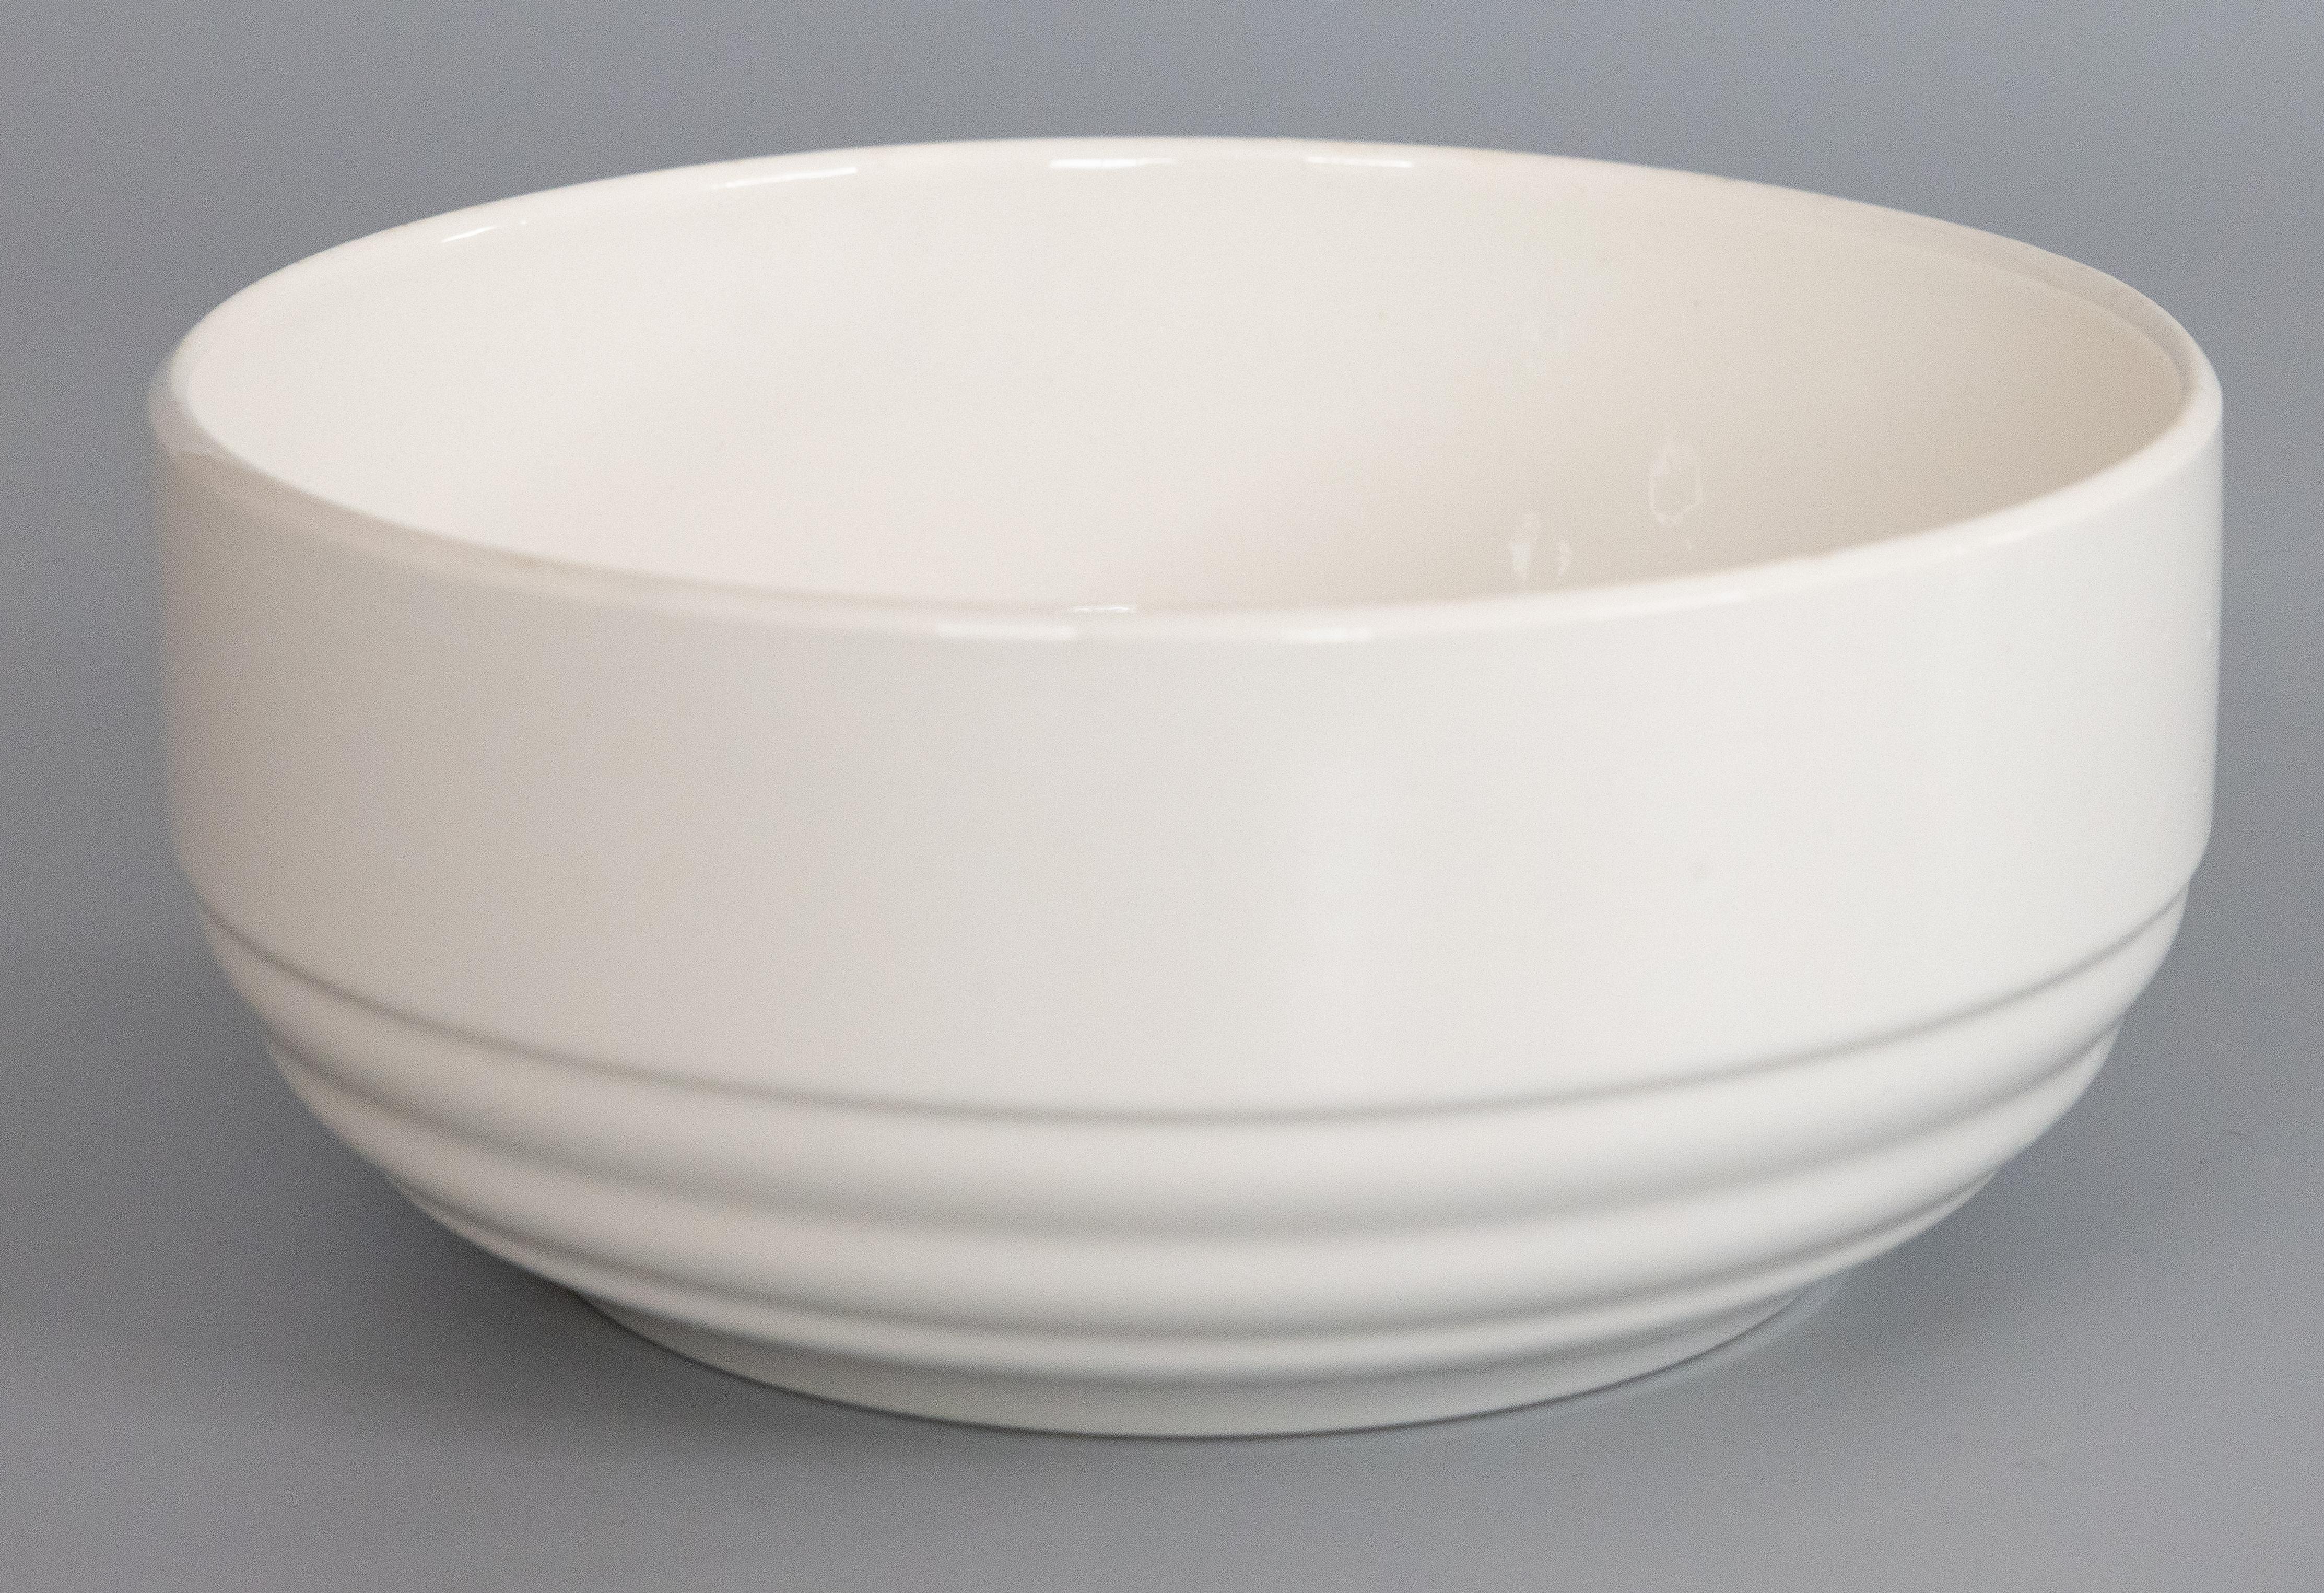 A lovely antique Art Deco white ironstone bowl by Boch Frères La Louvière, Belgium, circa 1920. Maker's mark on reverse. This sleek and stylish bowl has simple clean lines, perfect for the modern home and would be a wonderful addition to an